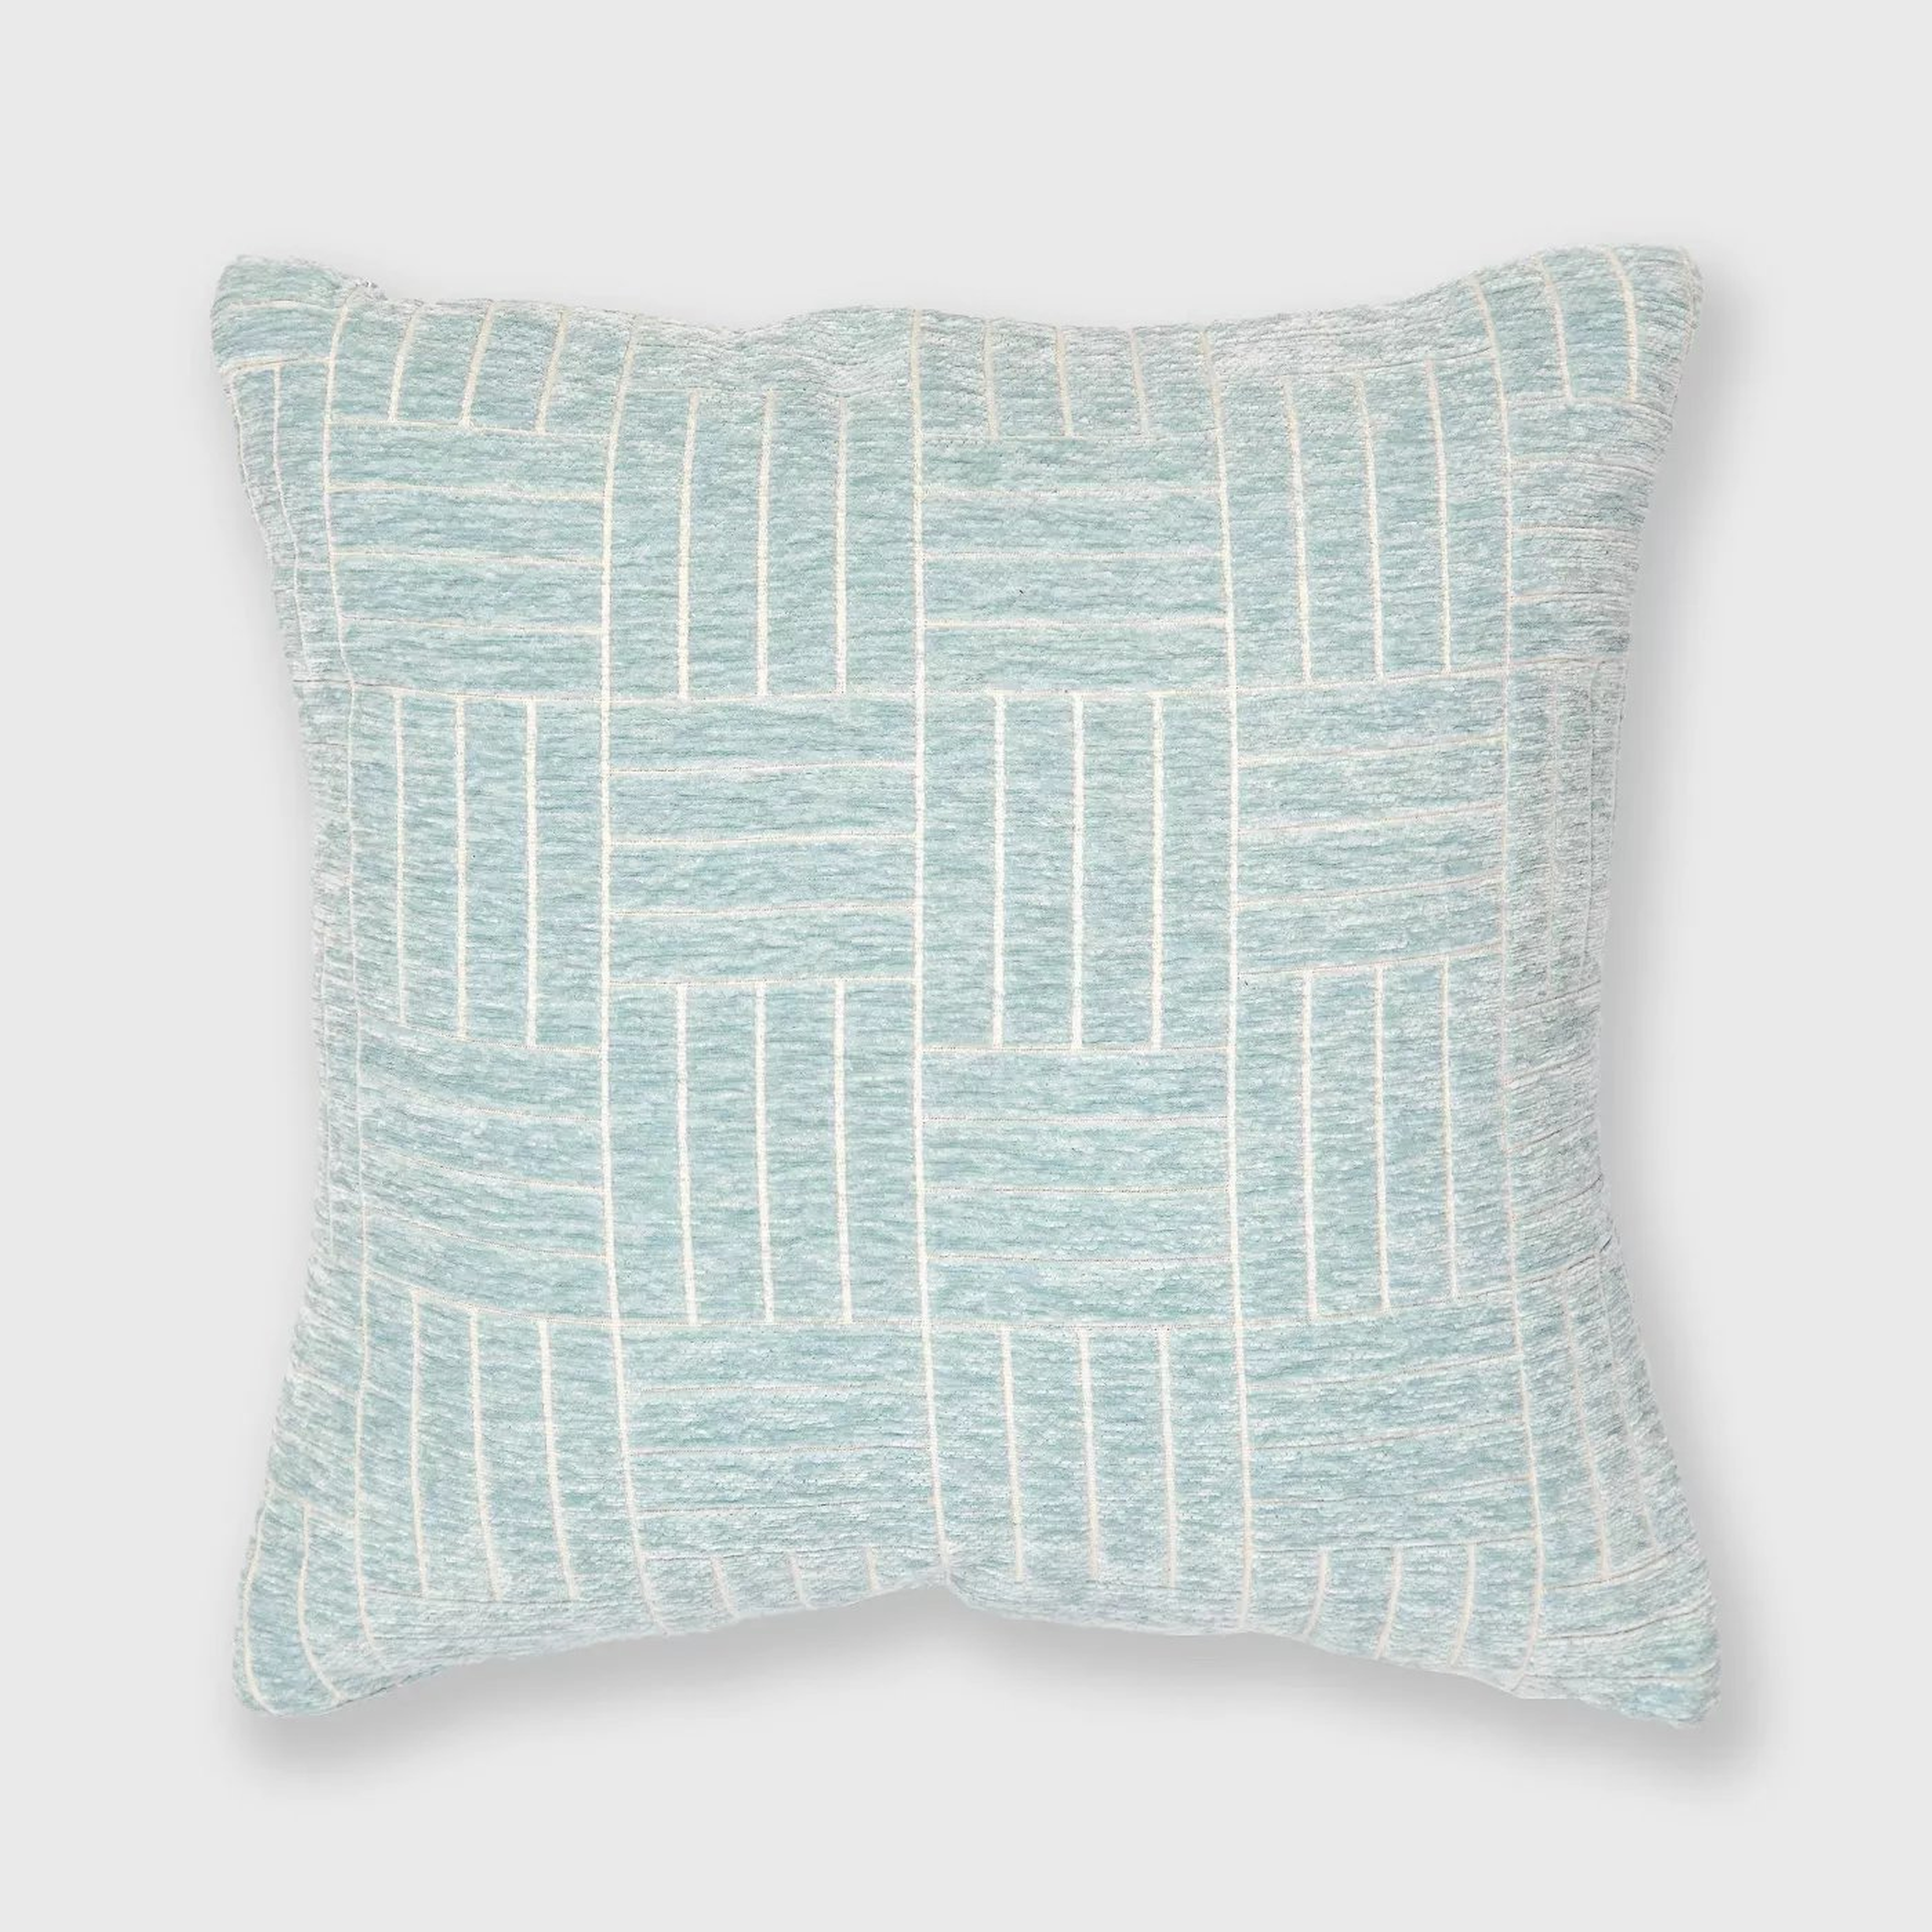 Staggered Striped Chenille Woven Jacquard Throw Pillow - freshmint - Wayfair